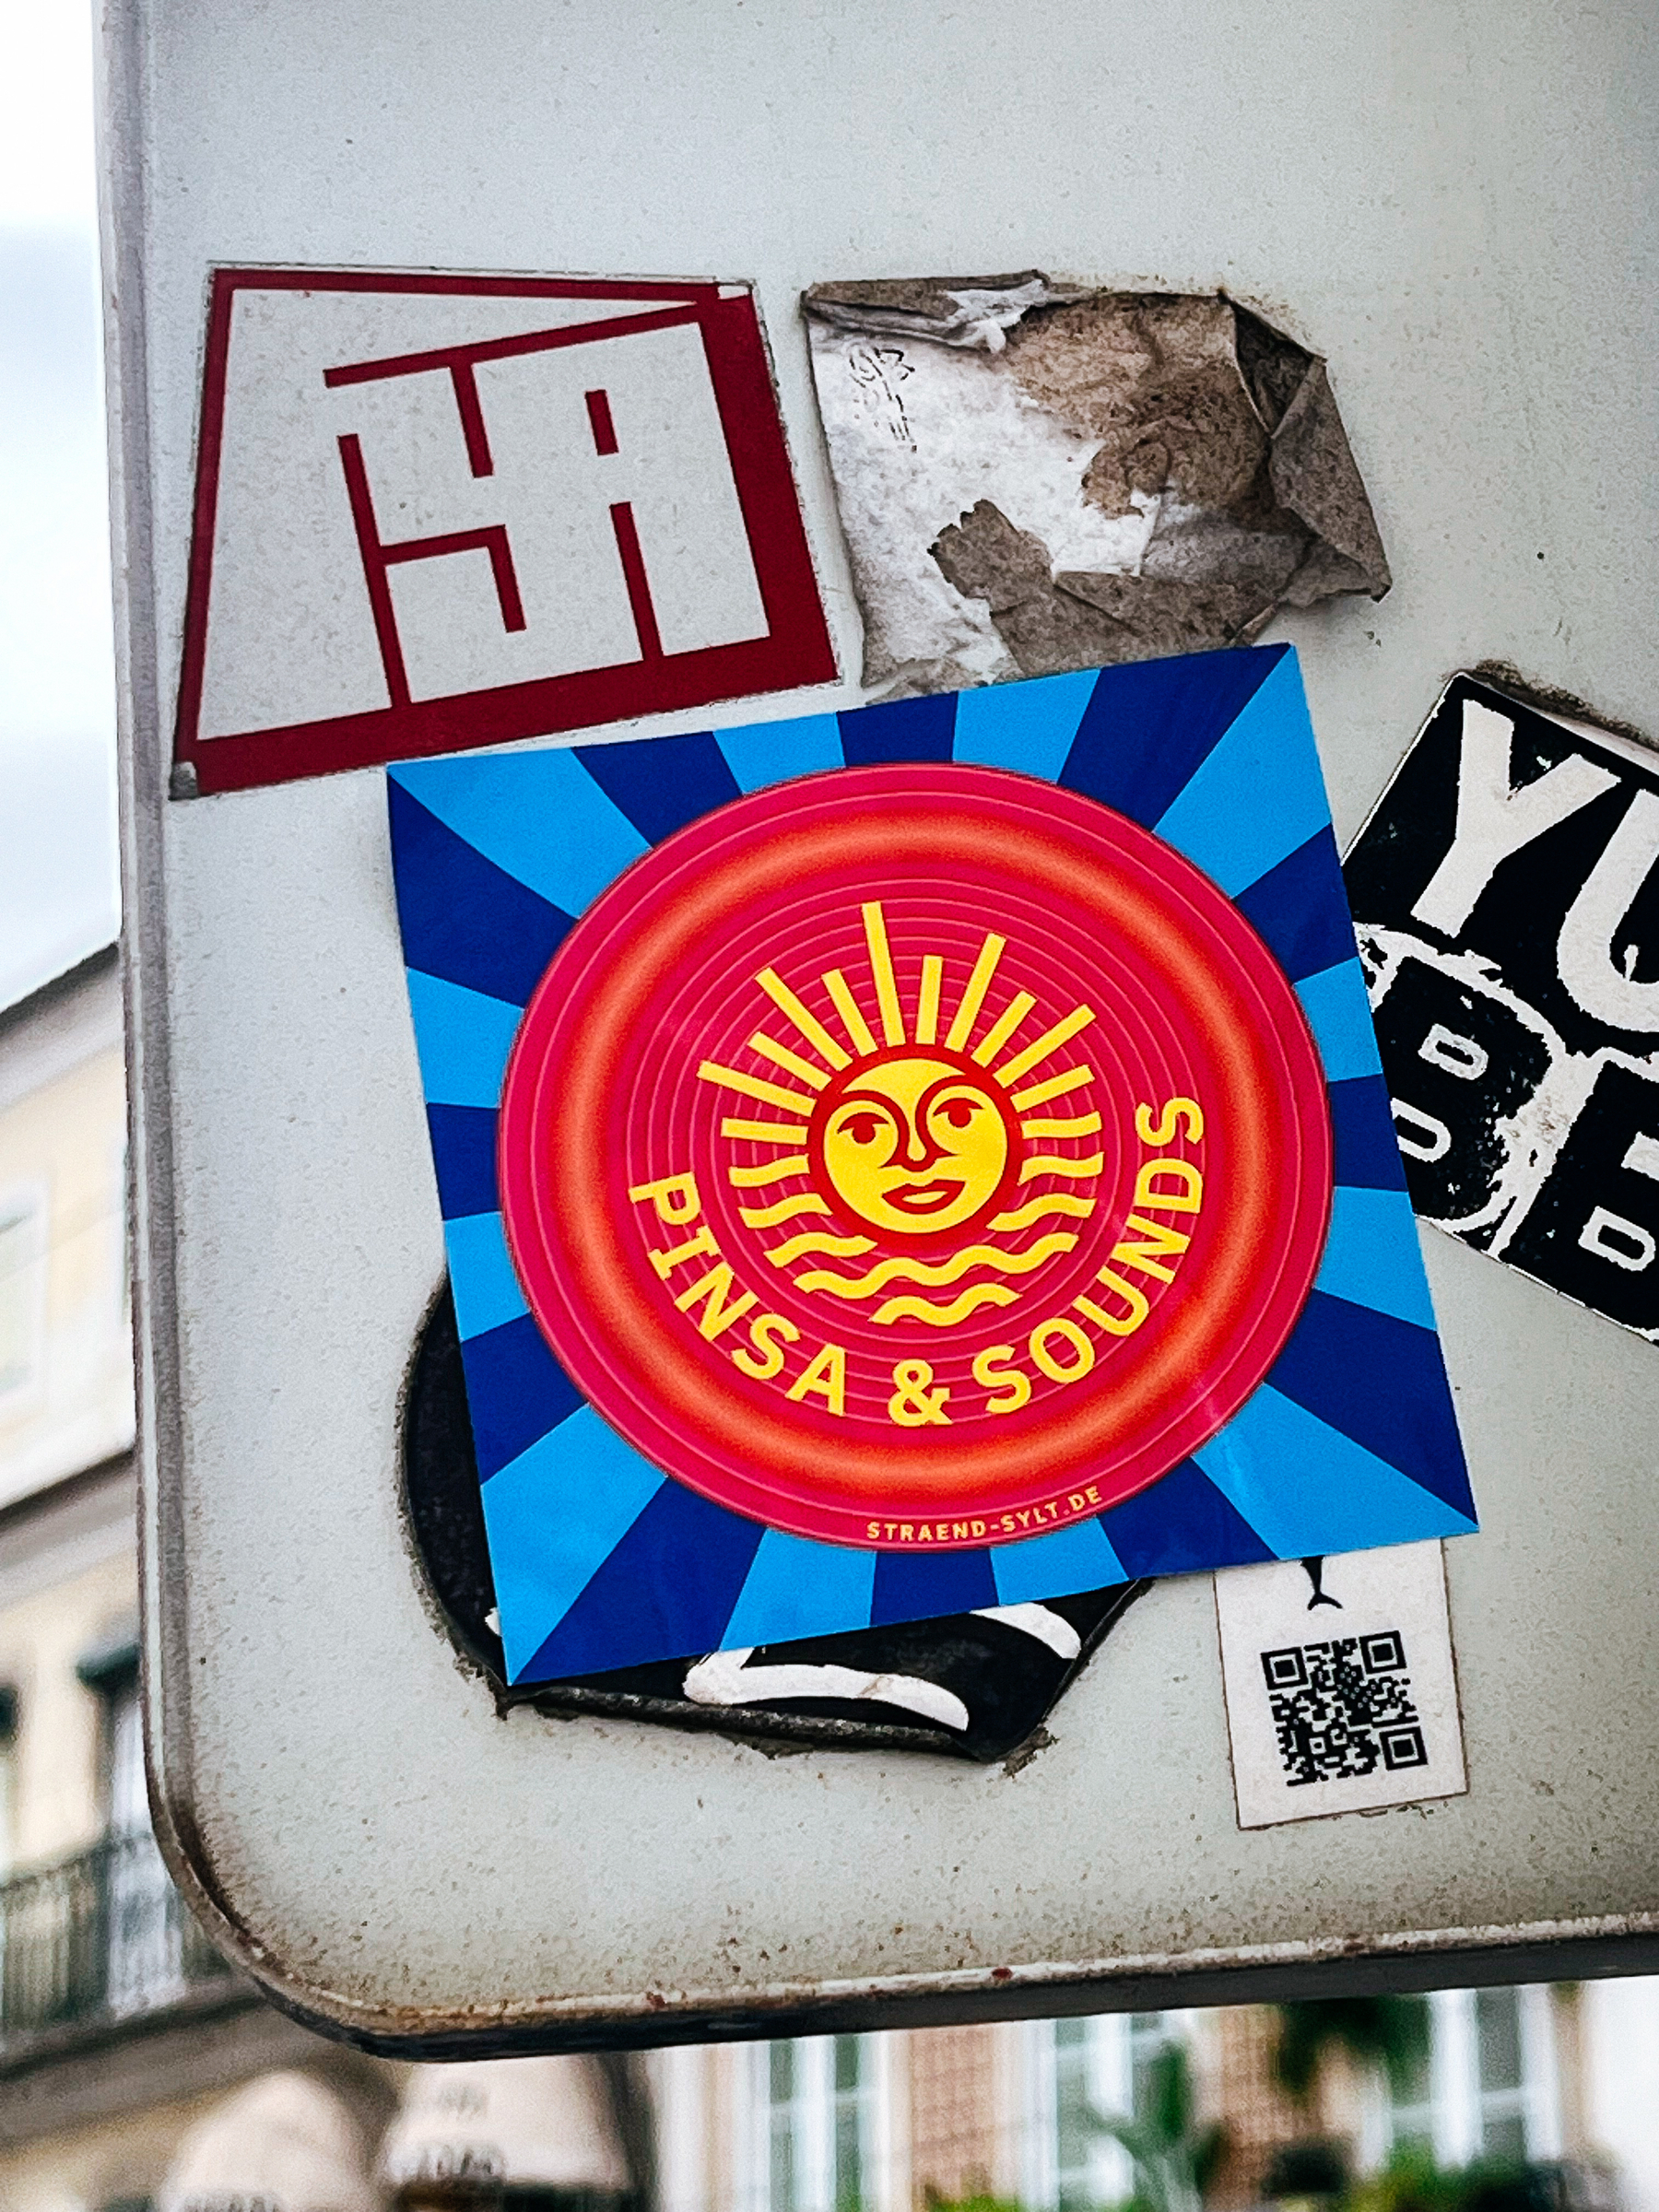 “PINSA&amp;SOUNDS”, on a round sticker, with a smiling sun and the sea. 